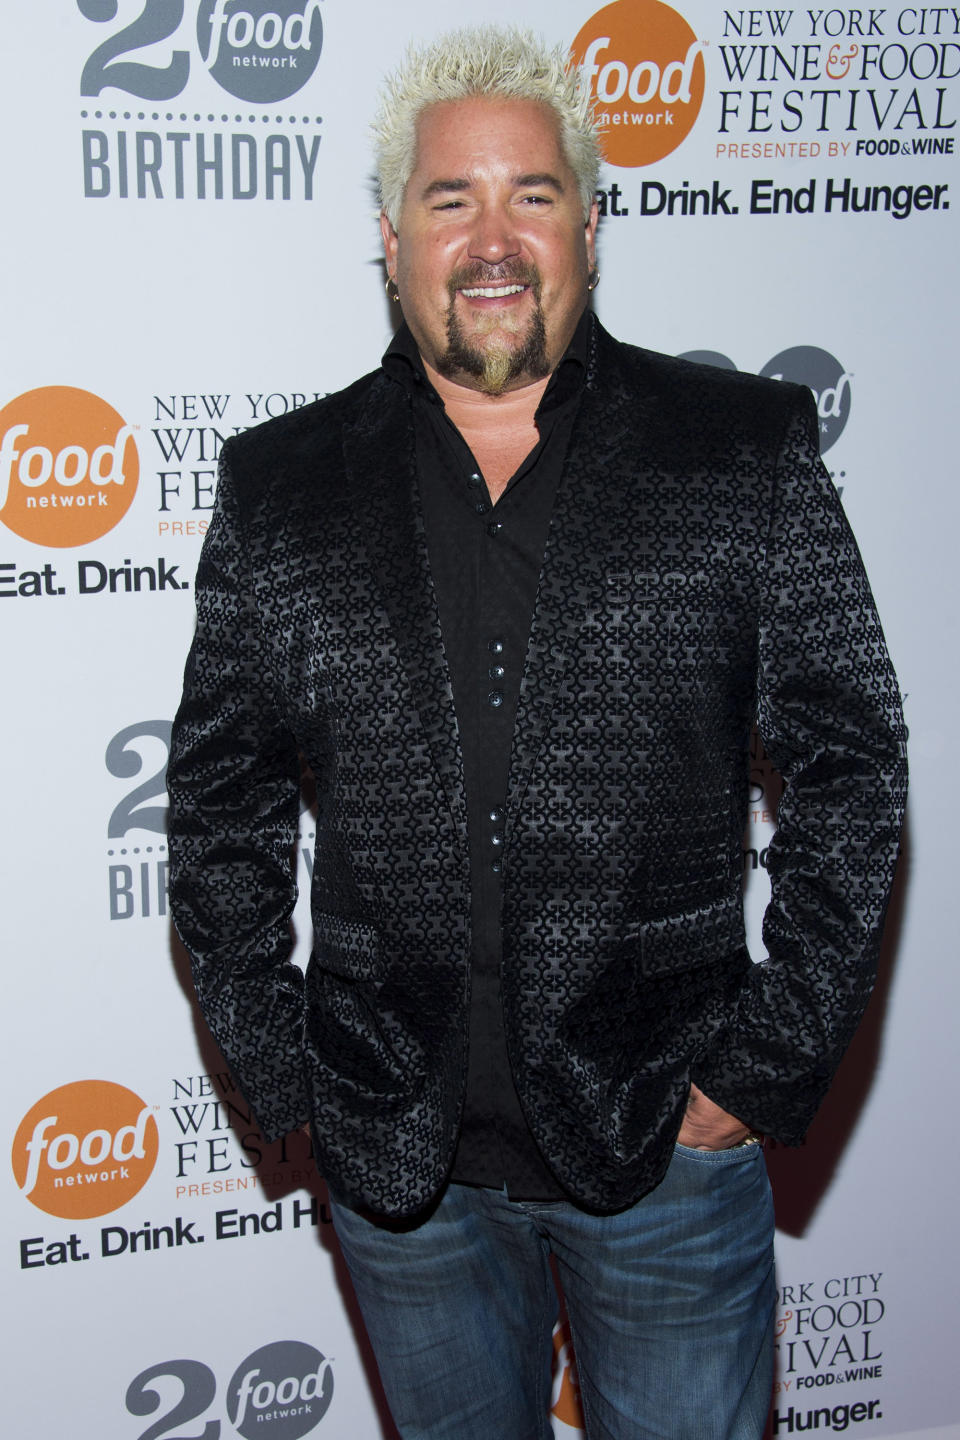 Guy Fieri attends the Food Network's 20th birthday party on Thursday, Oct. 17, 2013, in New York. (Photo by Charles Sykes/Invision/AP)